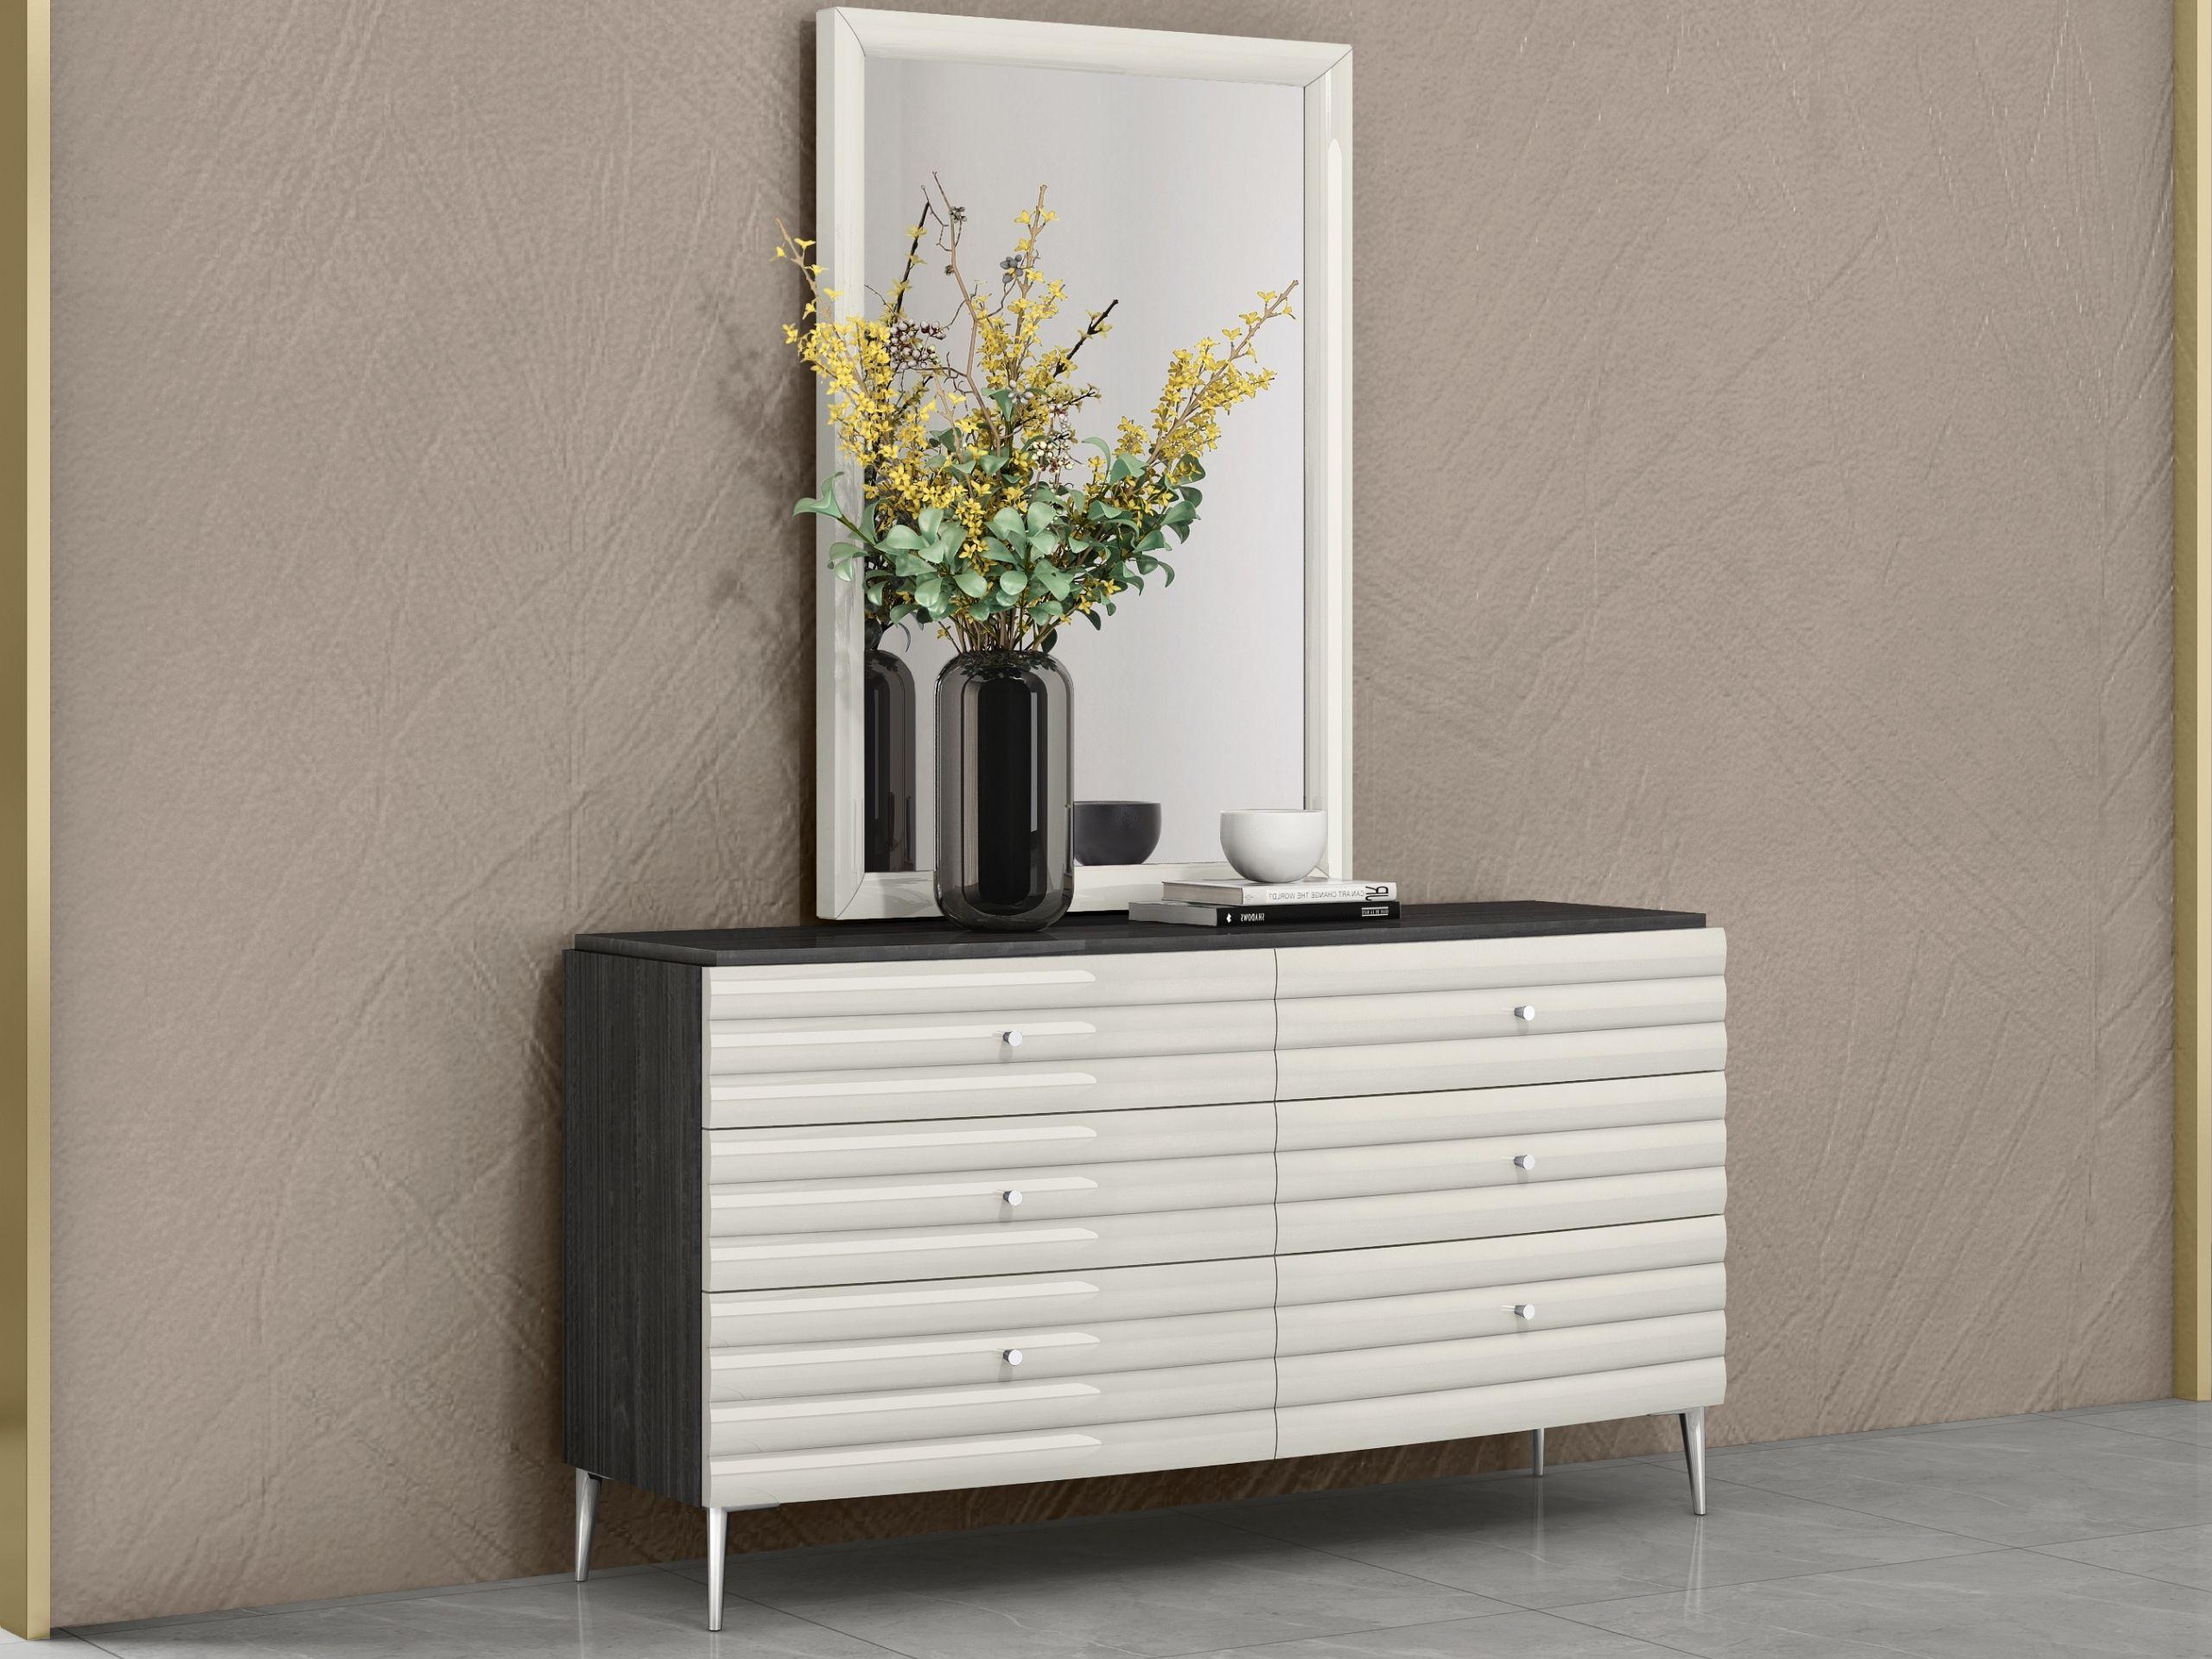 

    
WhiteLine DR1752-DGRY/LGRY Pino Dresser Dark Gray DR1752-DGRY/LGRY
